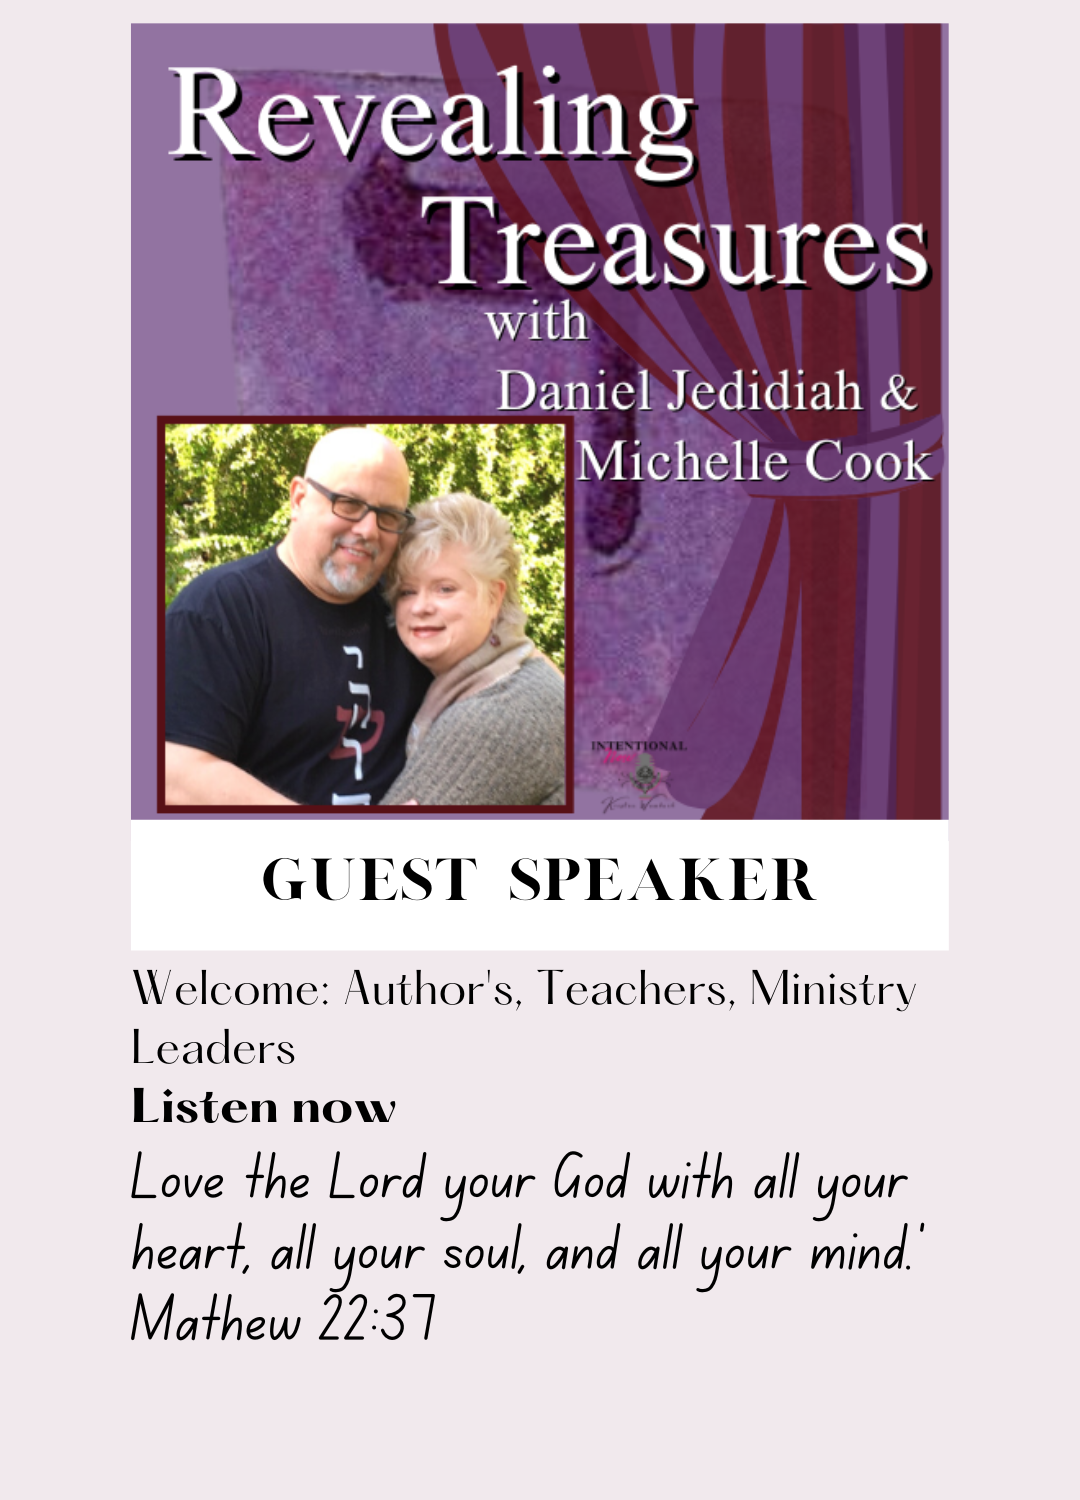 Intentional Now Podcast Episode Revealing Treasures with Daniel Jedidiah & Michelle Cook